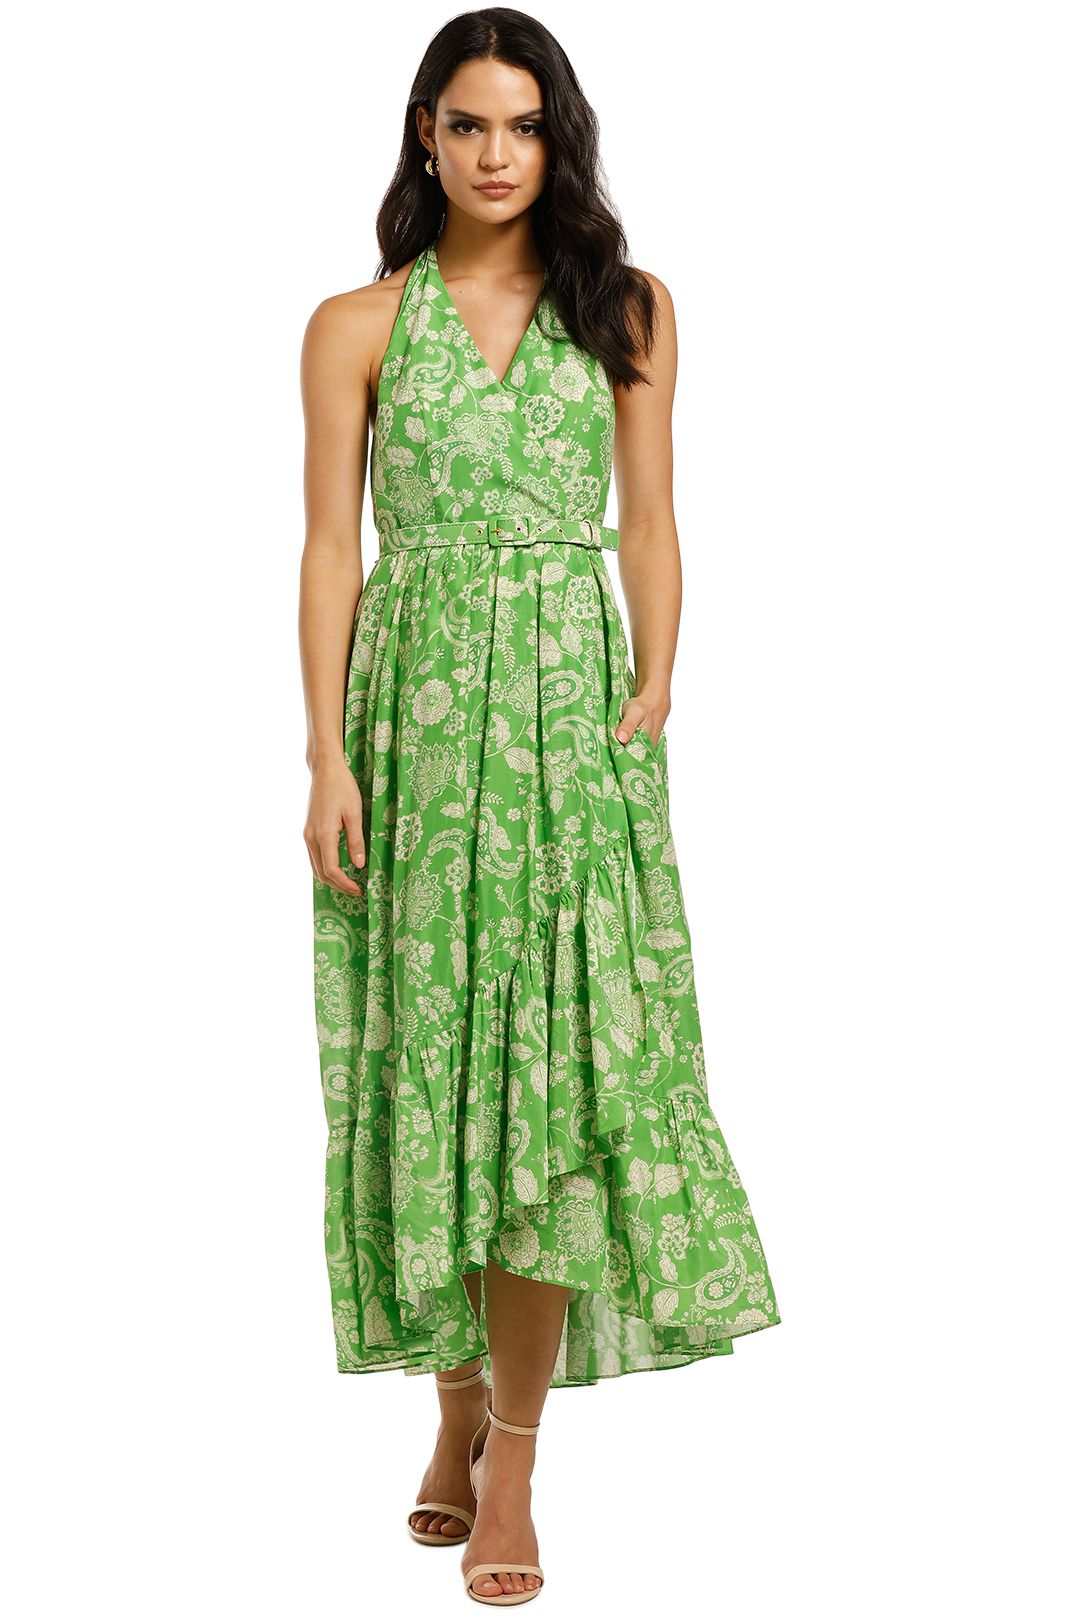 Patricia Dress in Leaf 60s Tonal Paisley by Nicholas for Rent